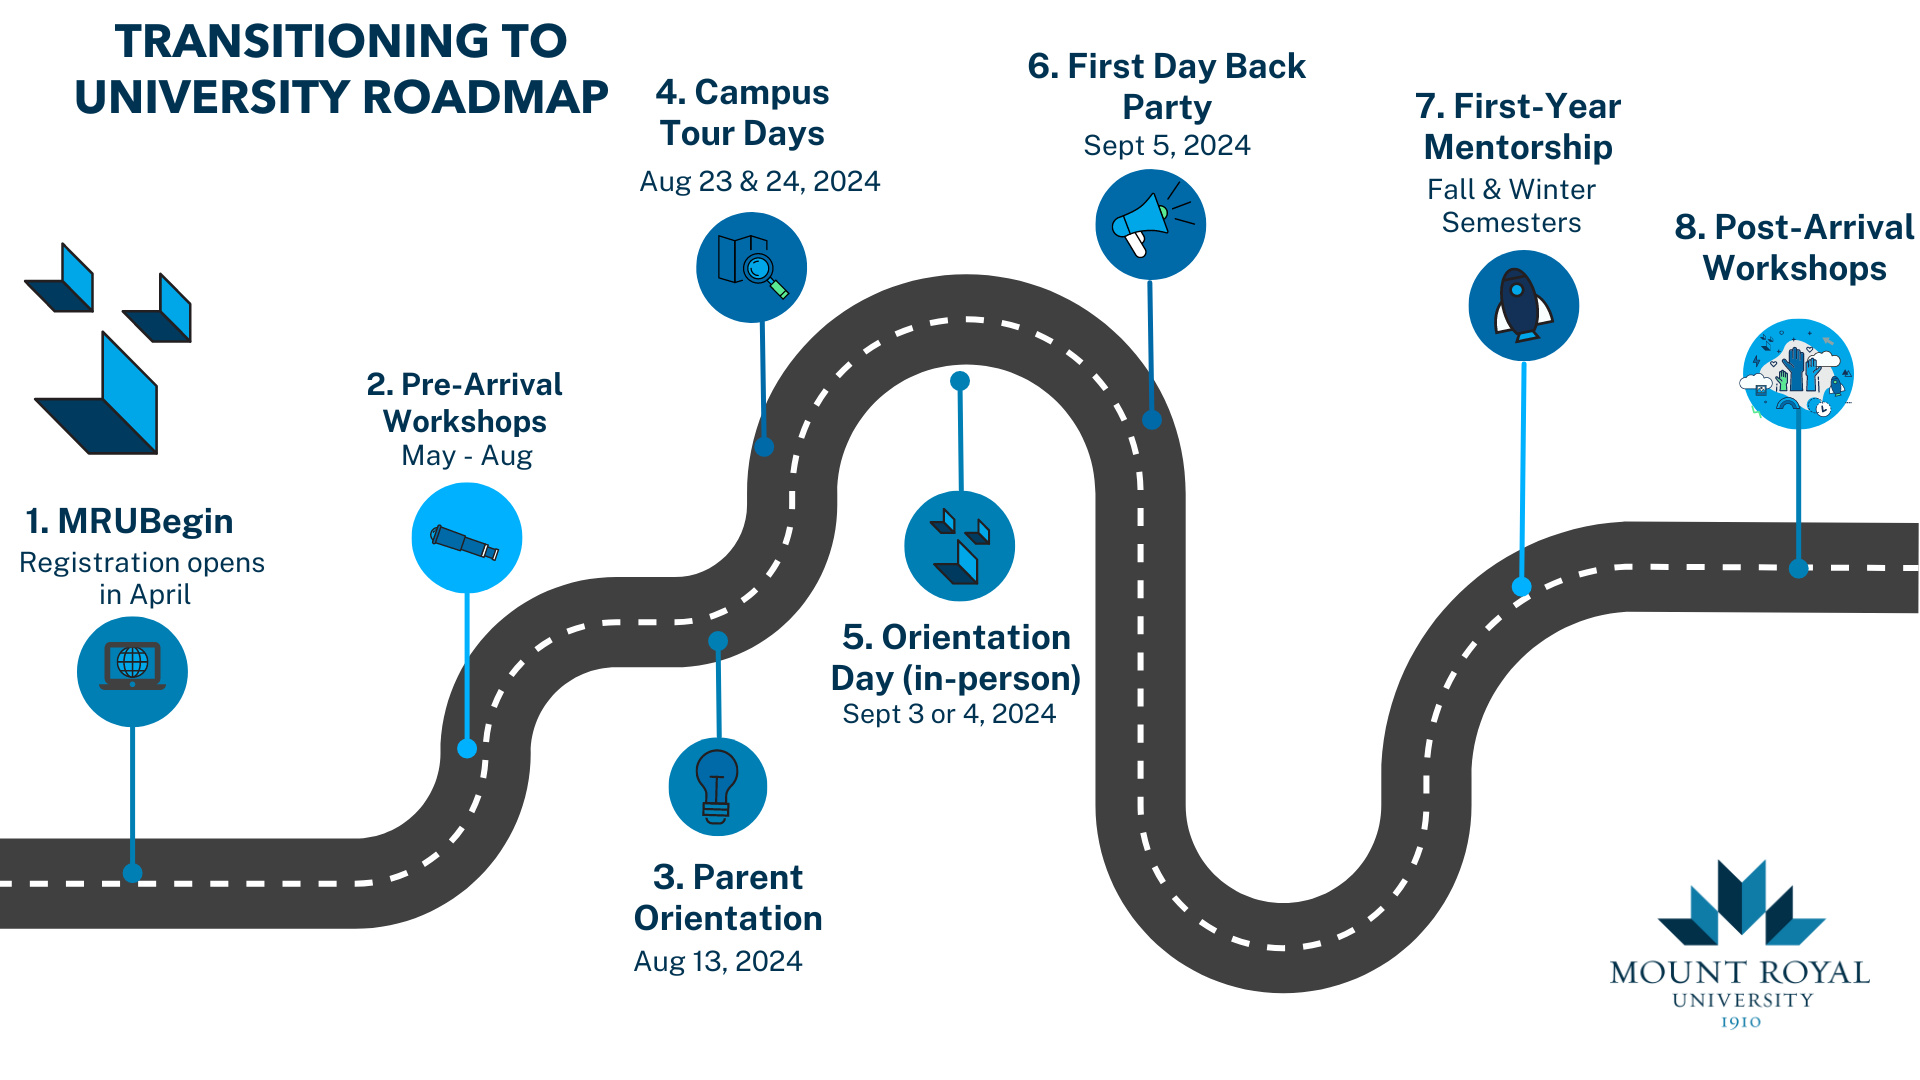 Road map for students of whats to come during their transition to university. 